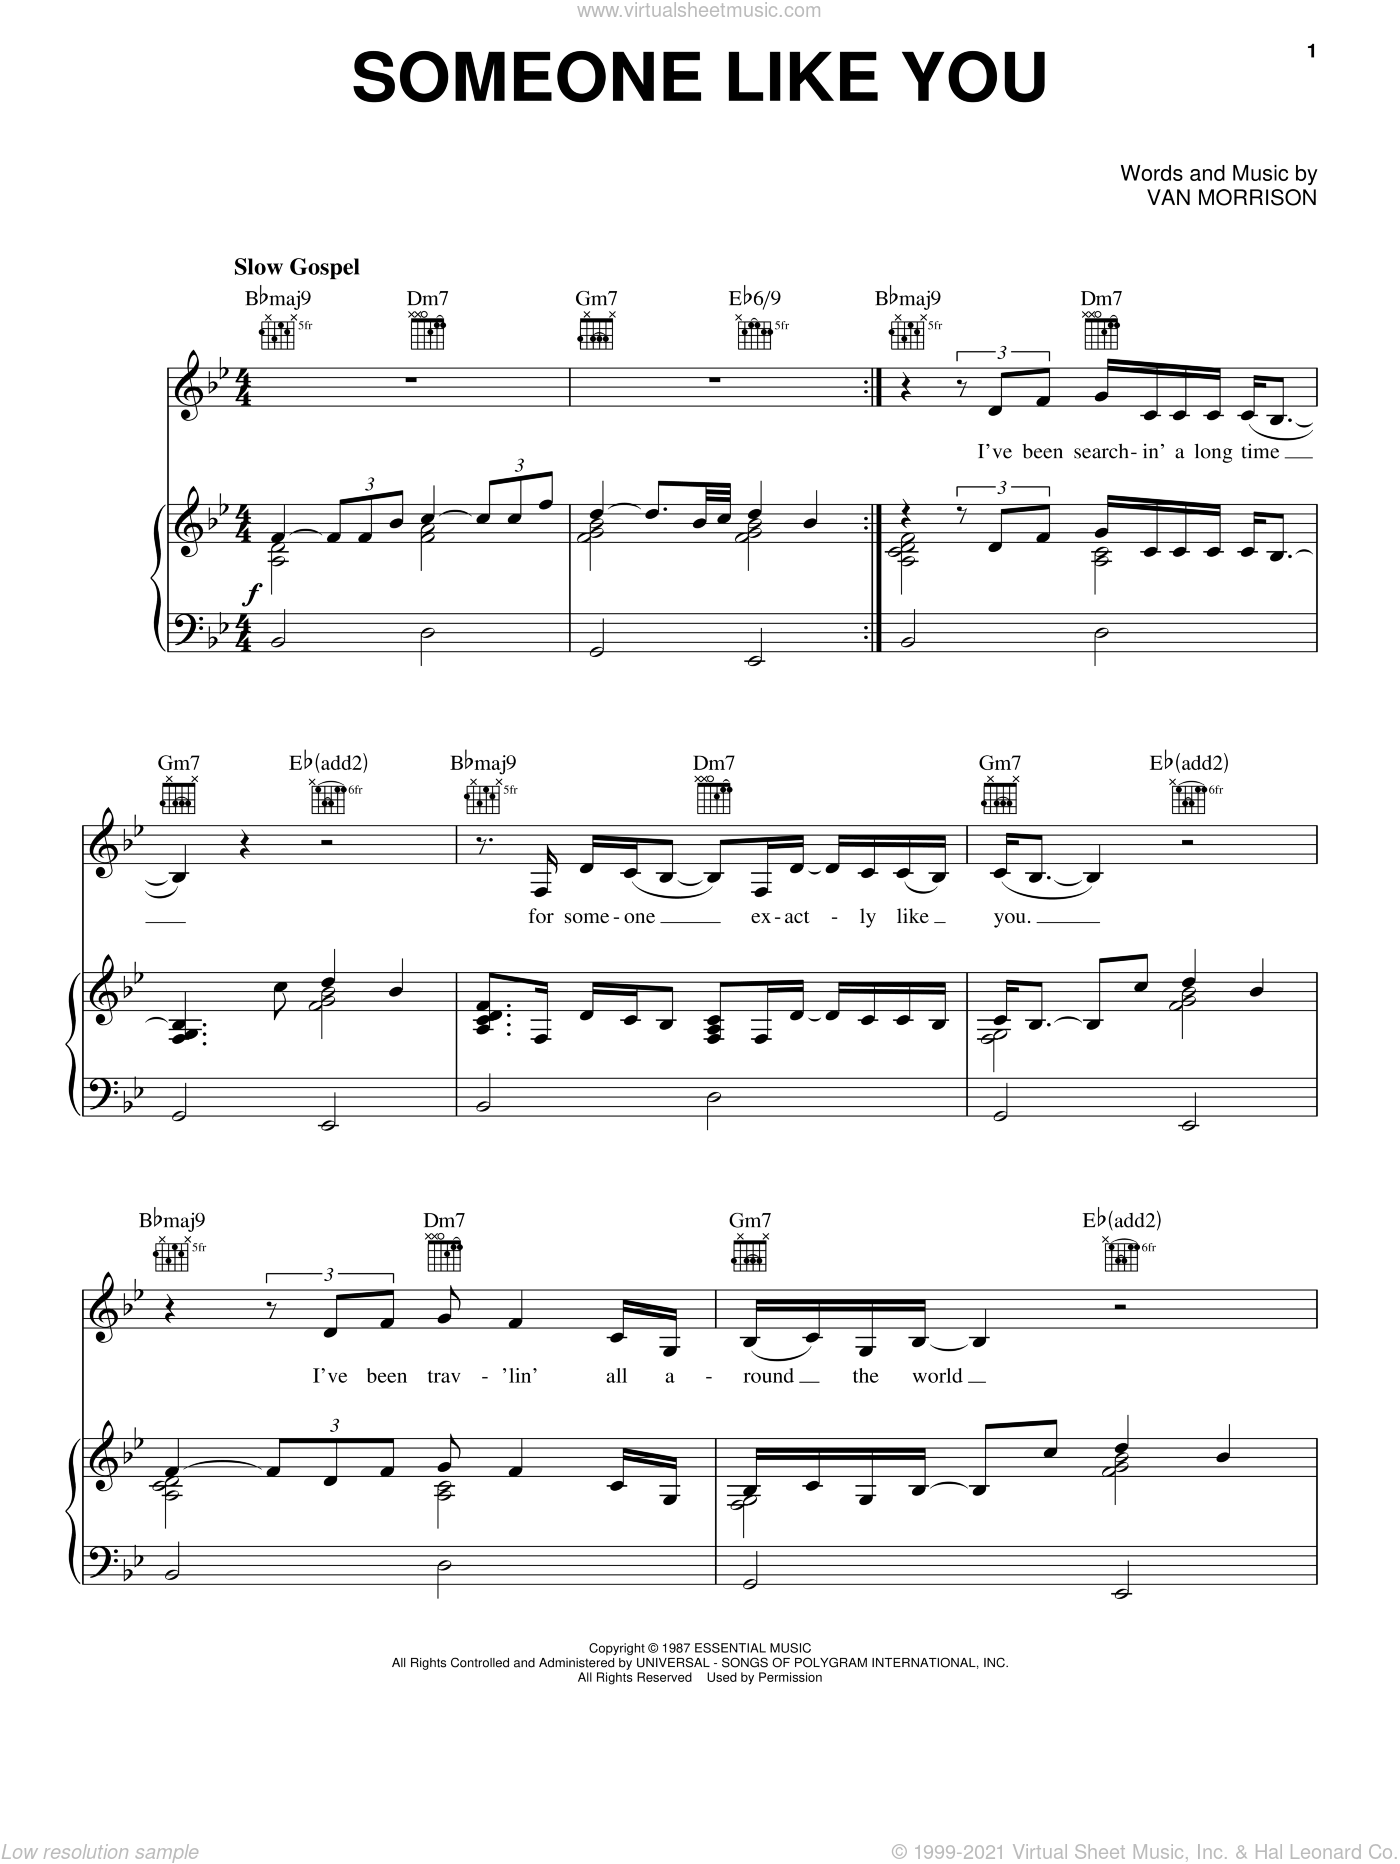 Morrison - Someone Like You sheet music for voice, piano or guitar